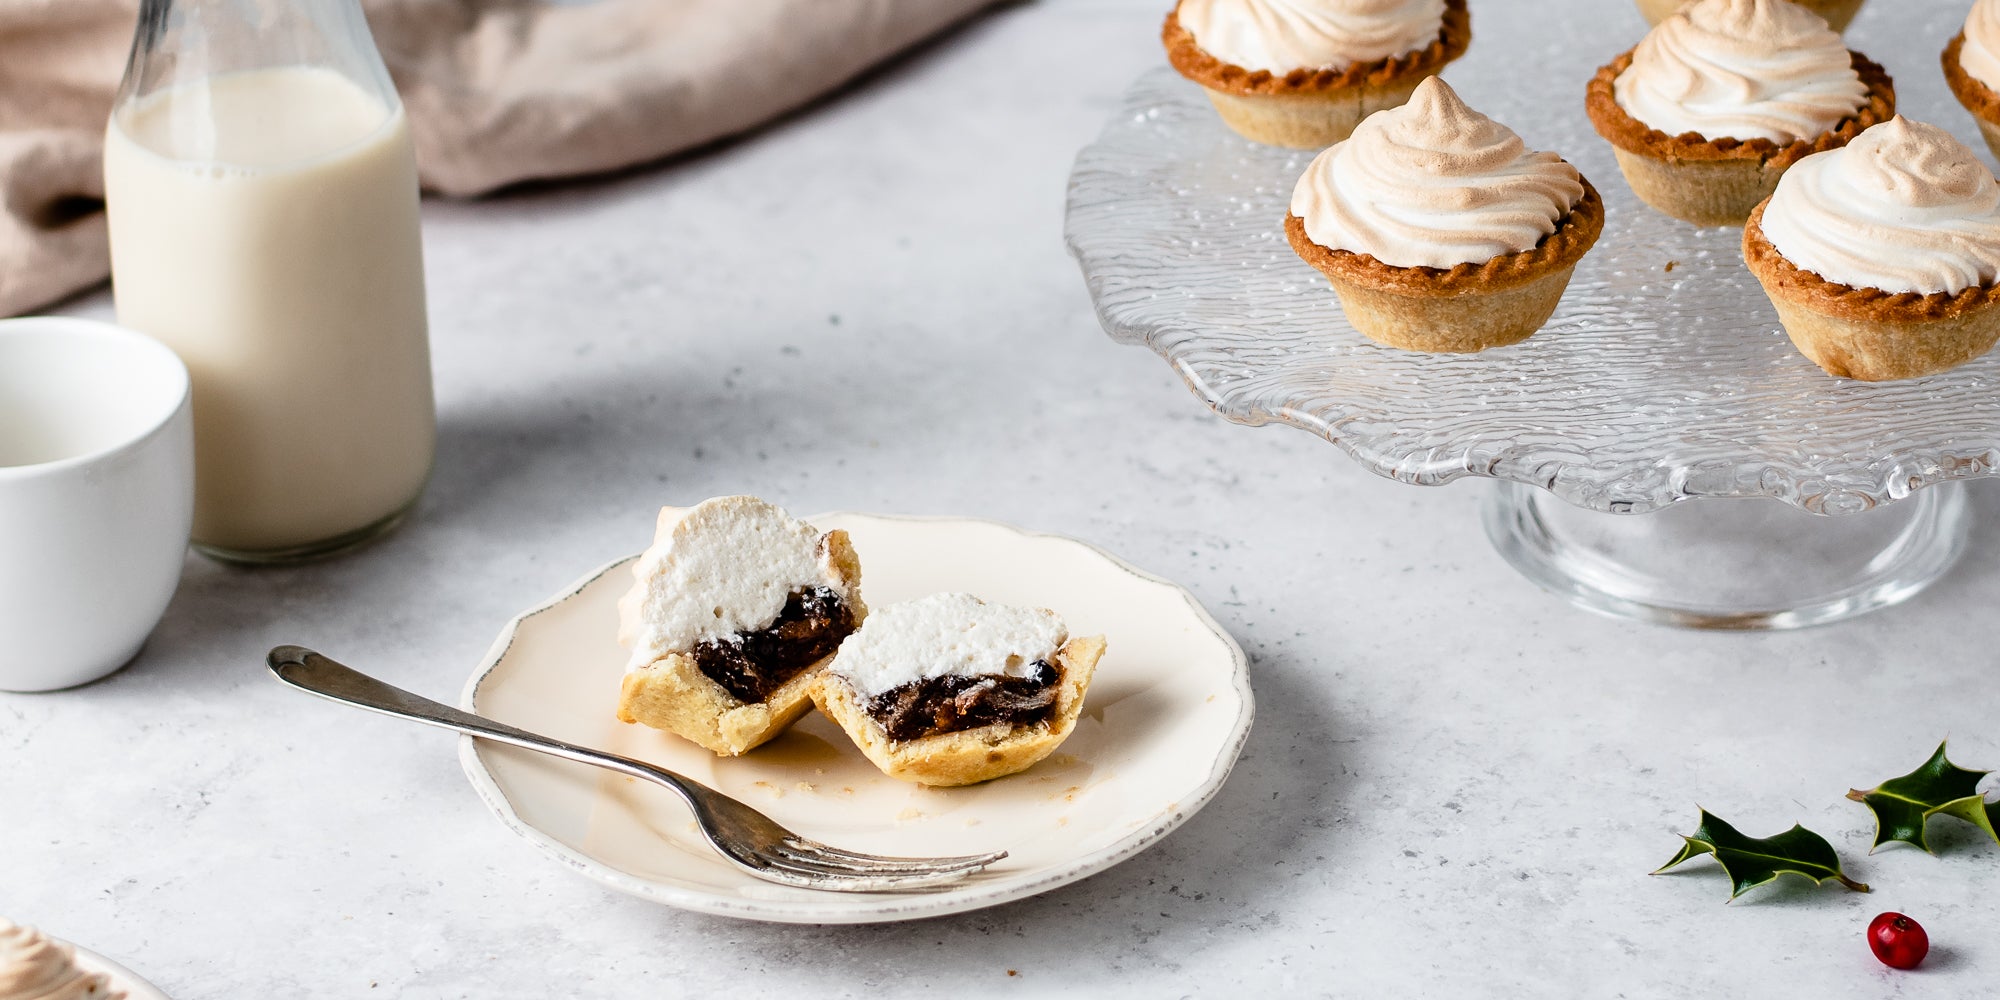 Meringue Topped Mince Pie sliced in half on a plate showing the inside filled with mincemeat and meringue next to a fork